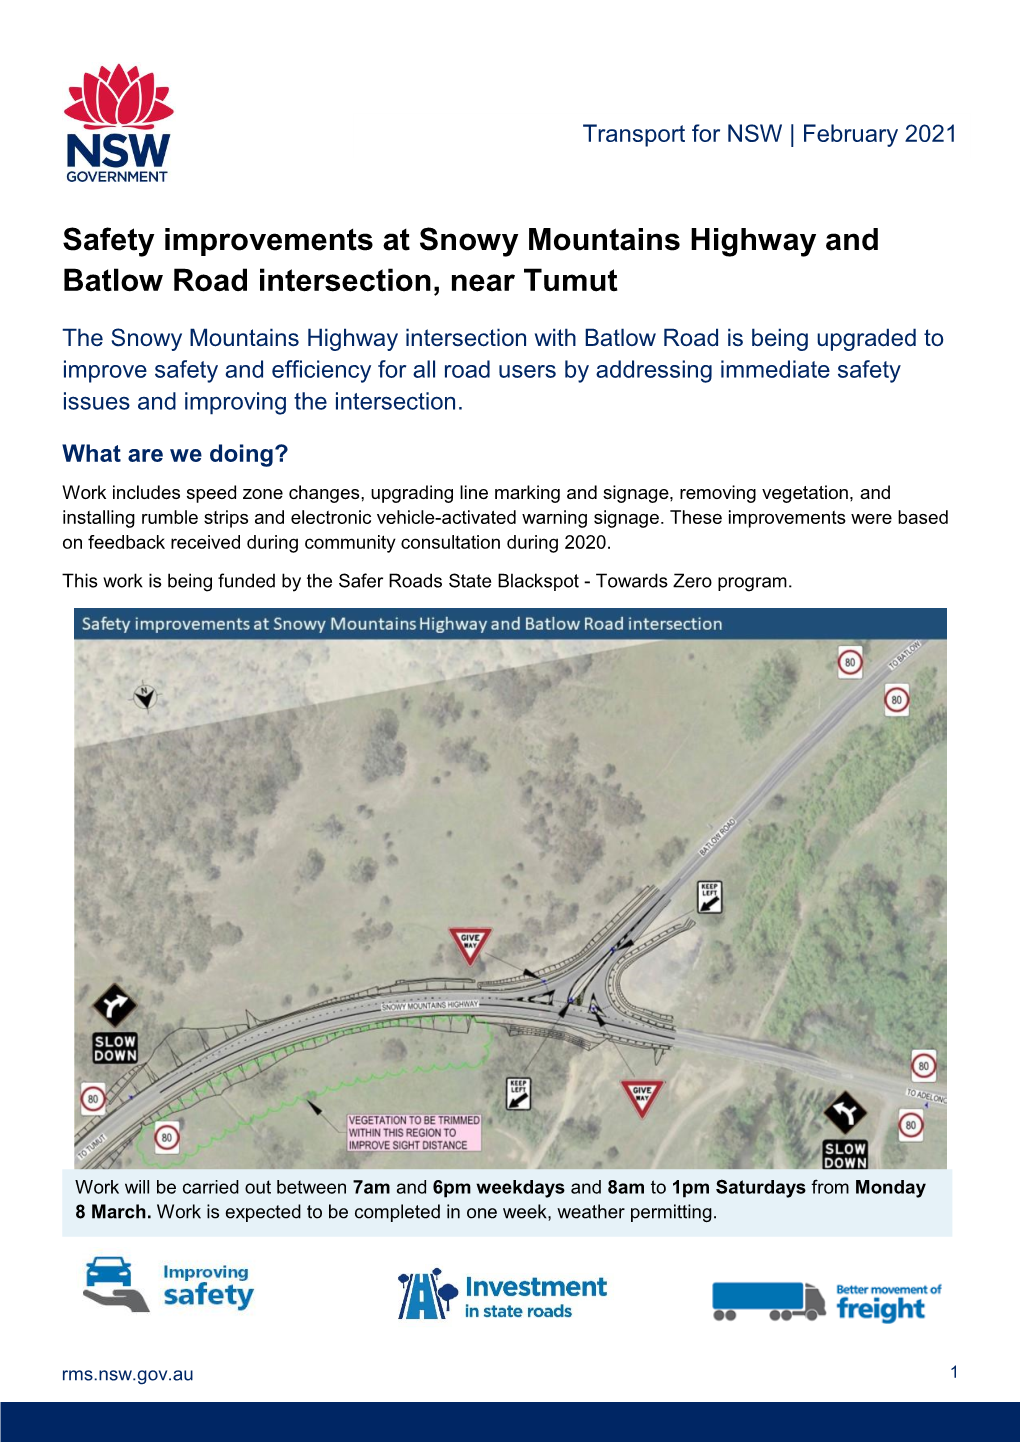 Safety Improvements at Snowy Mountains Highway and Batlow Road Intersection, Near Tumut